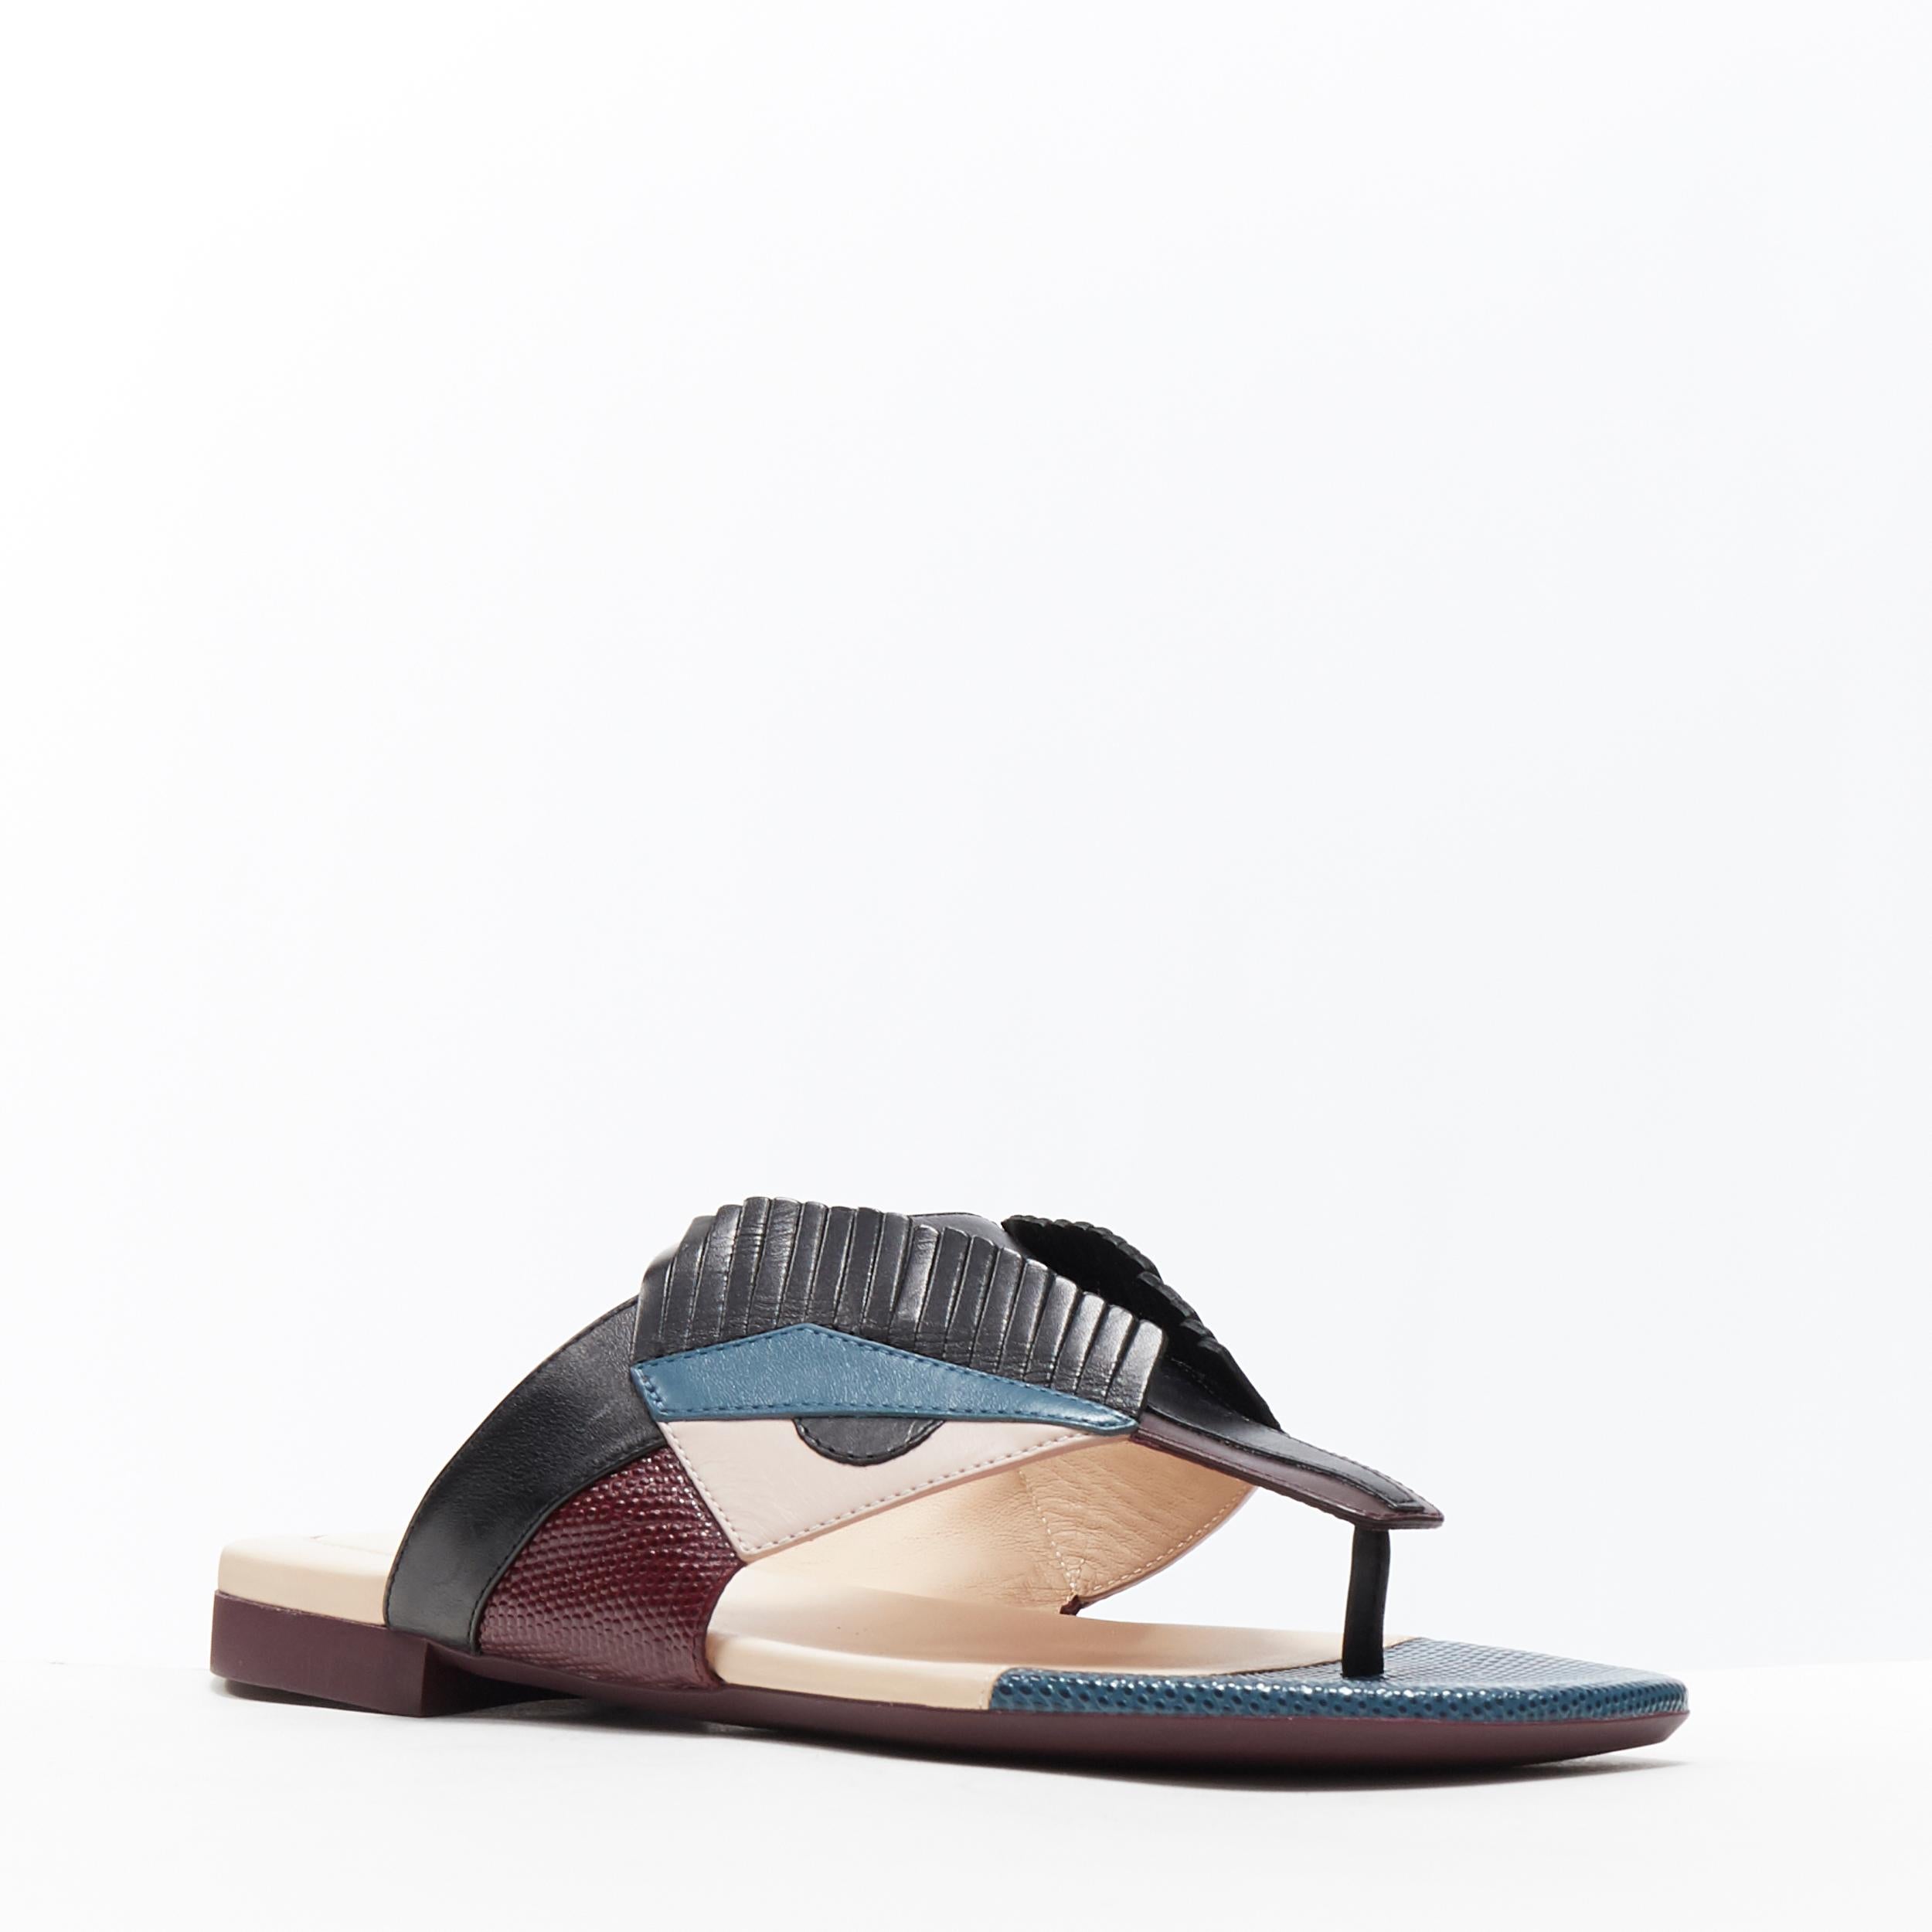 FENDI Monster Bug Eye angry eyelash face colorblocked flat thong slippers EU35
Brand: Fendi
Model Name / Style: Monster sandals
Material: Leather
Color: Black, purple, navy
Pattern: Geometric
Extra Detail: Thong sandals. Flat (Under 1 in) heel